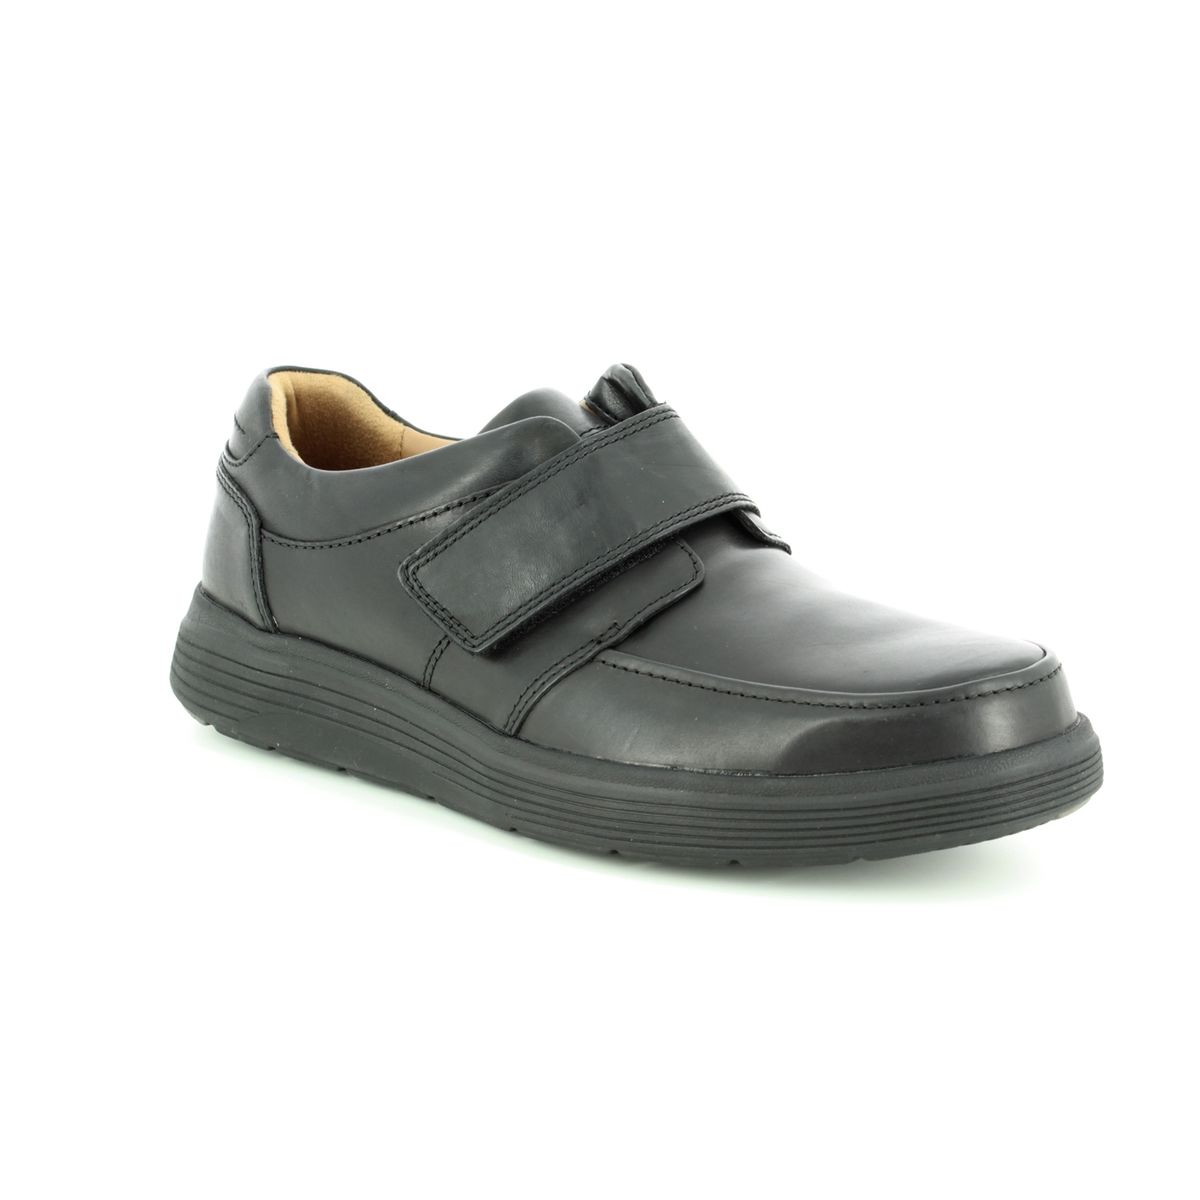 Clarks Un Abode Strap Black Leather Mens Comfort Shoes 3698-68H In Size 12 In Plain Black Leather H Width Fitting Extra Wide